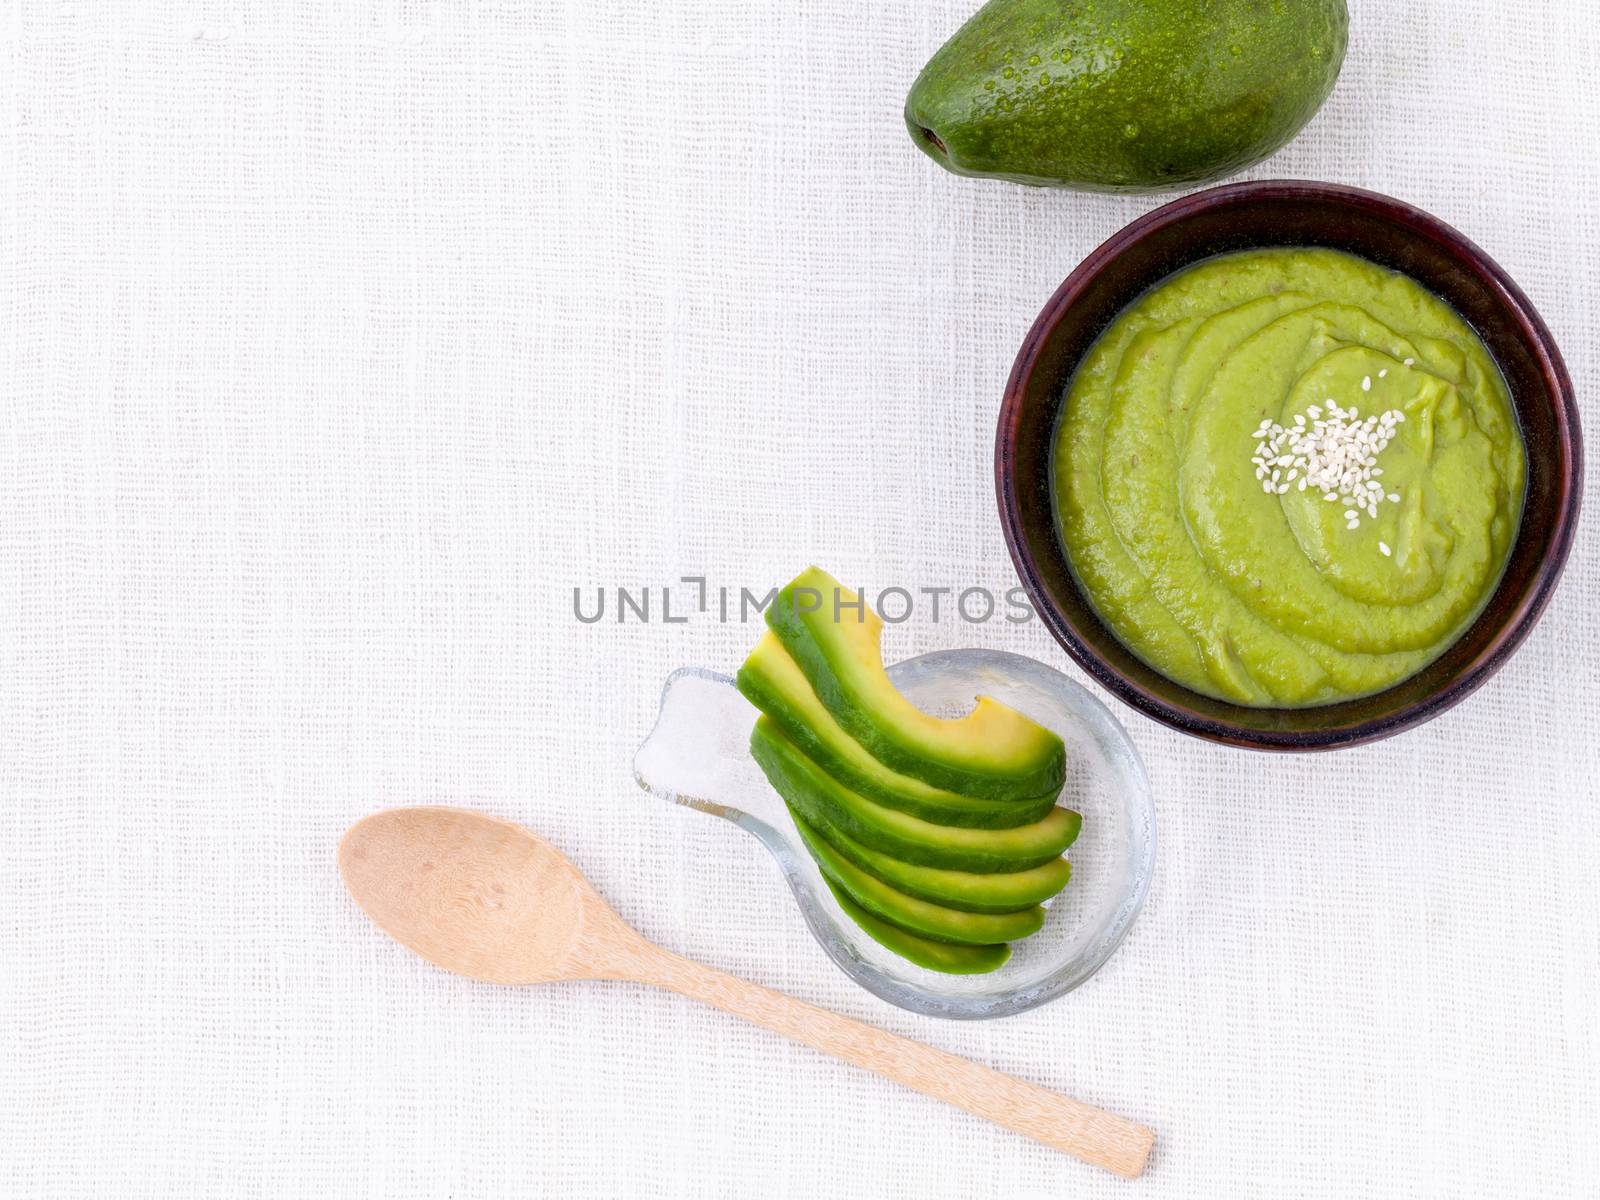 
Healthy diet and Clean food. Avocado smoothie on white backgrou by kerdkanno